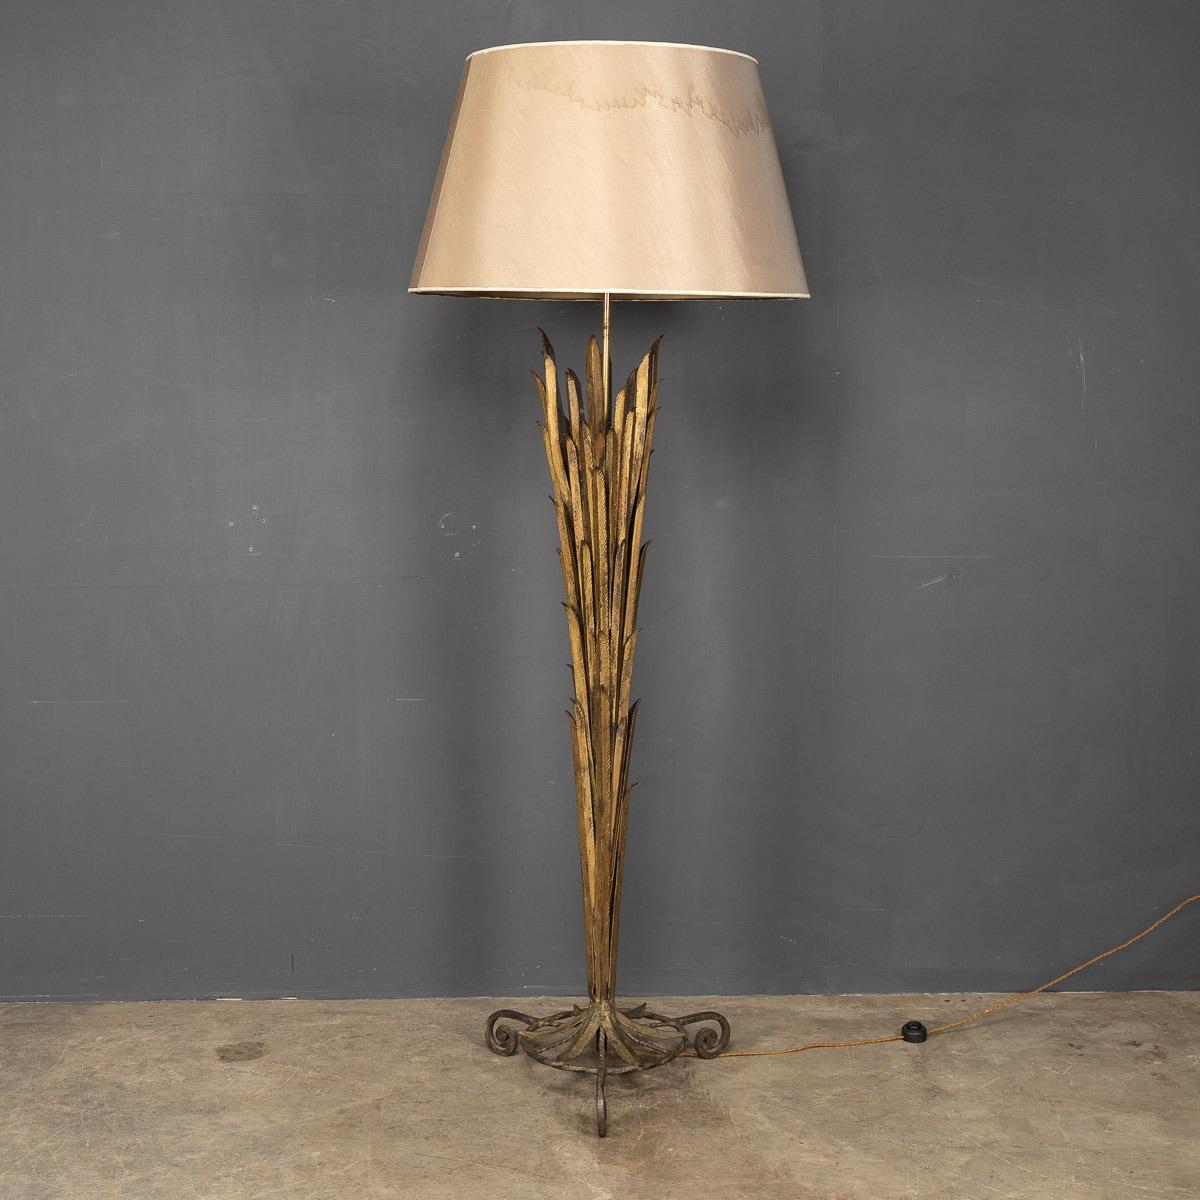 A French floor lamp with an iron scrolled base and wrought iron gilded body attributed to Maison Bagues. With a fabric and gilt lined shade.

CONDITION
In great condition - fine vintage condition, perfect working order.

SIZE
Diameter: 43cm
Height: